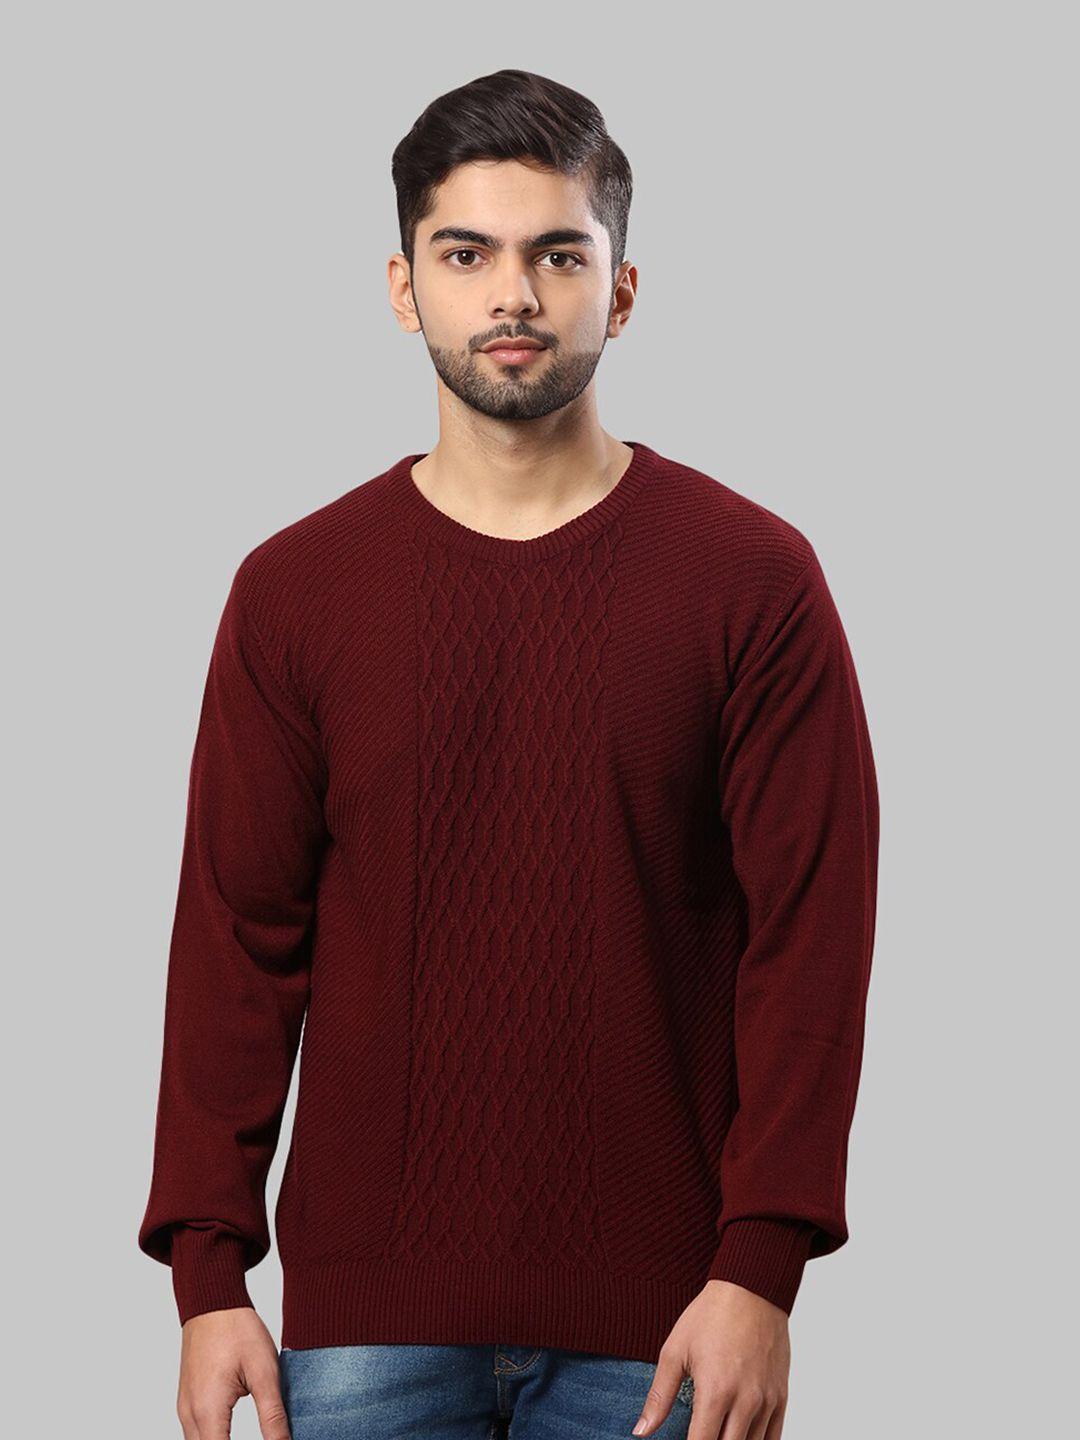 raymond-men-maroon-cable-knit-pullover-sweater